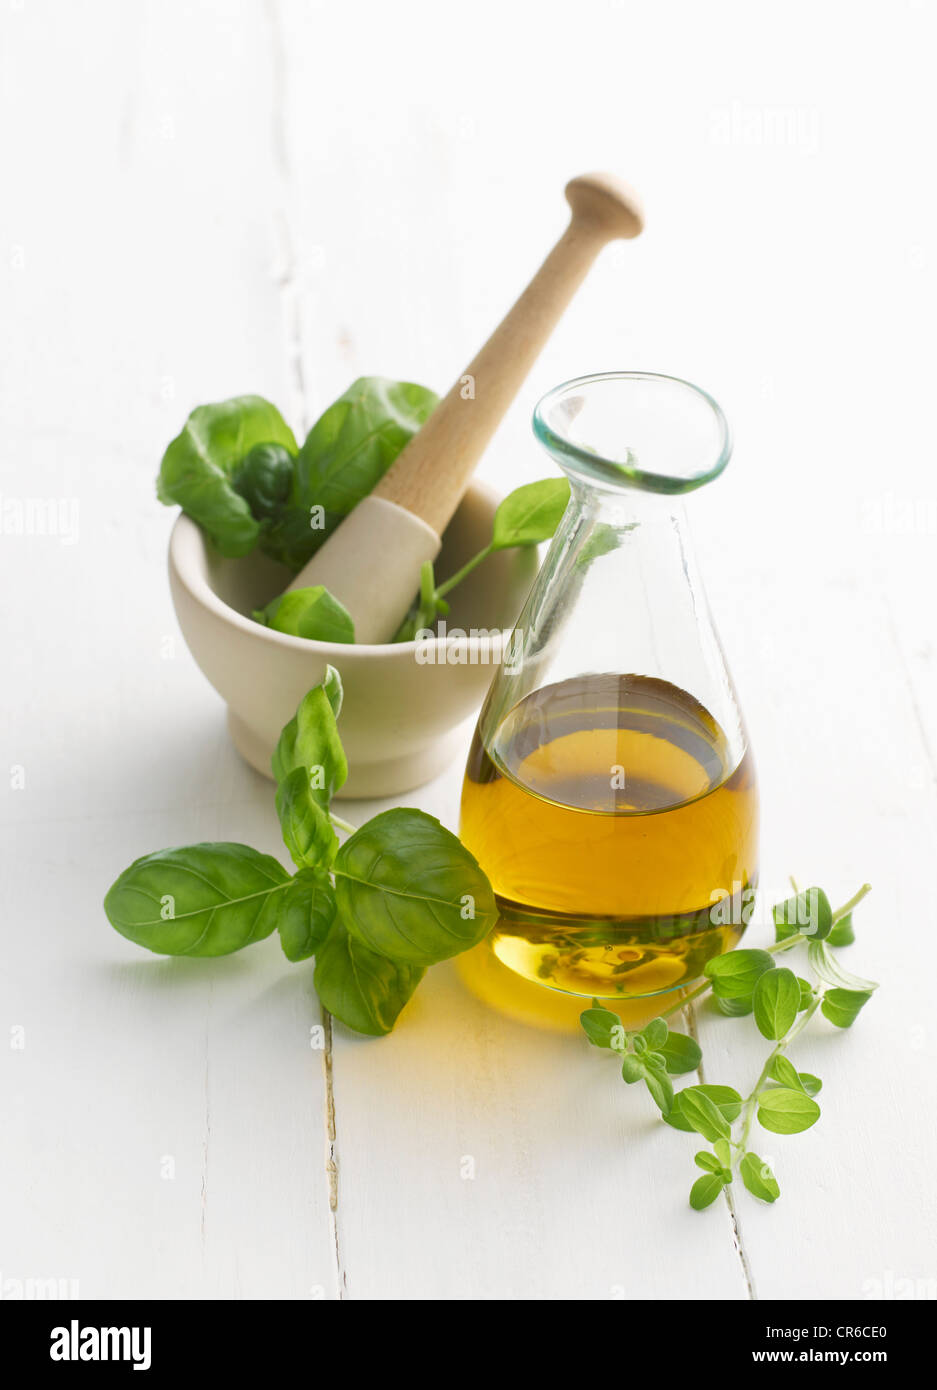 Basil and oregano leaf in mortar and pestle Stock Photo